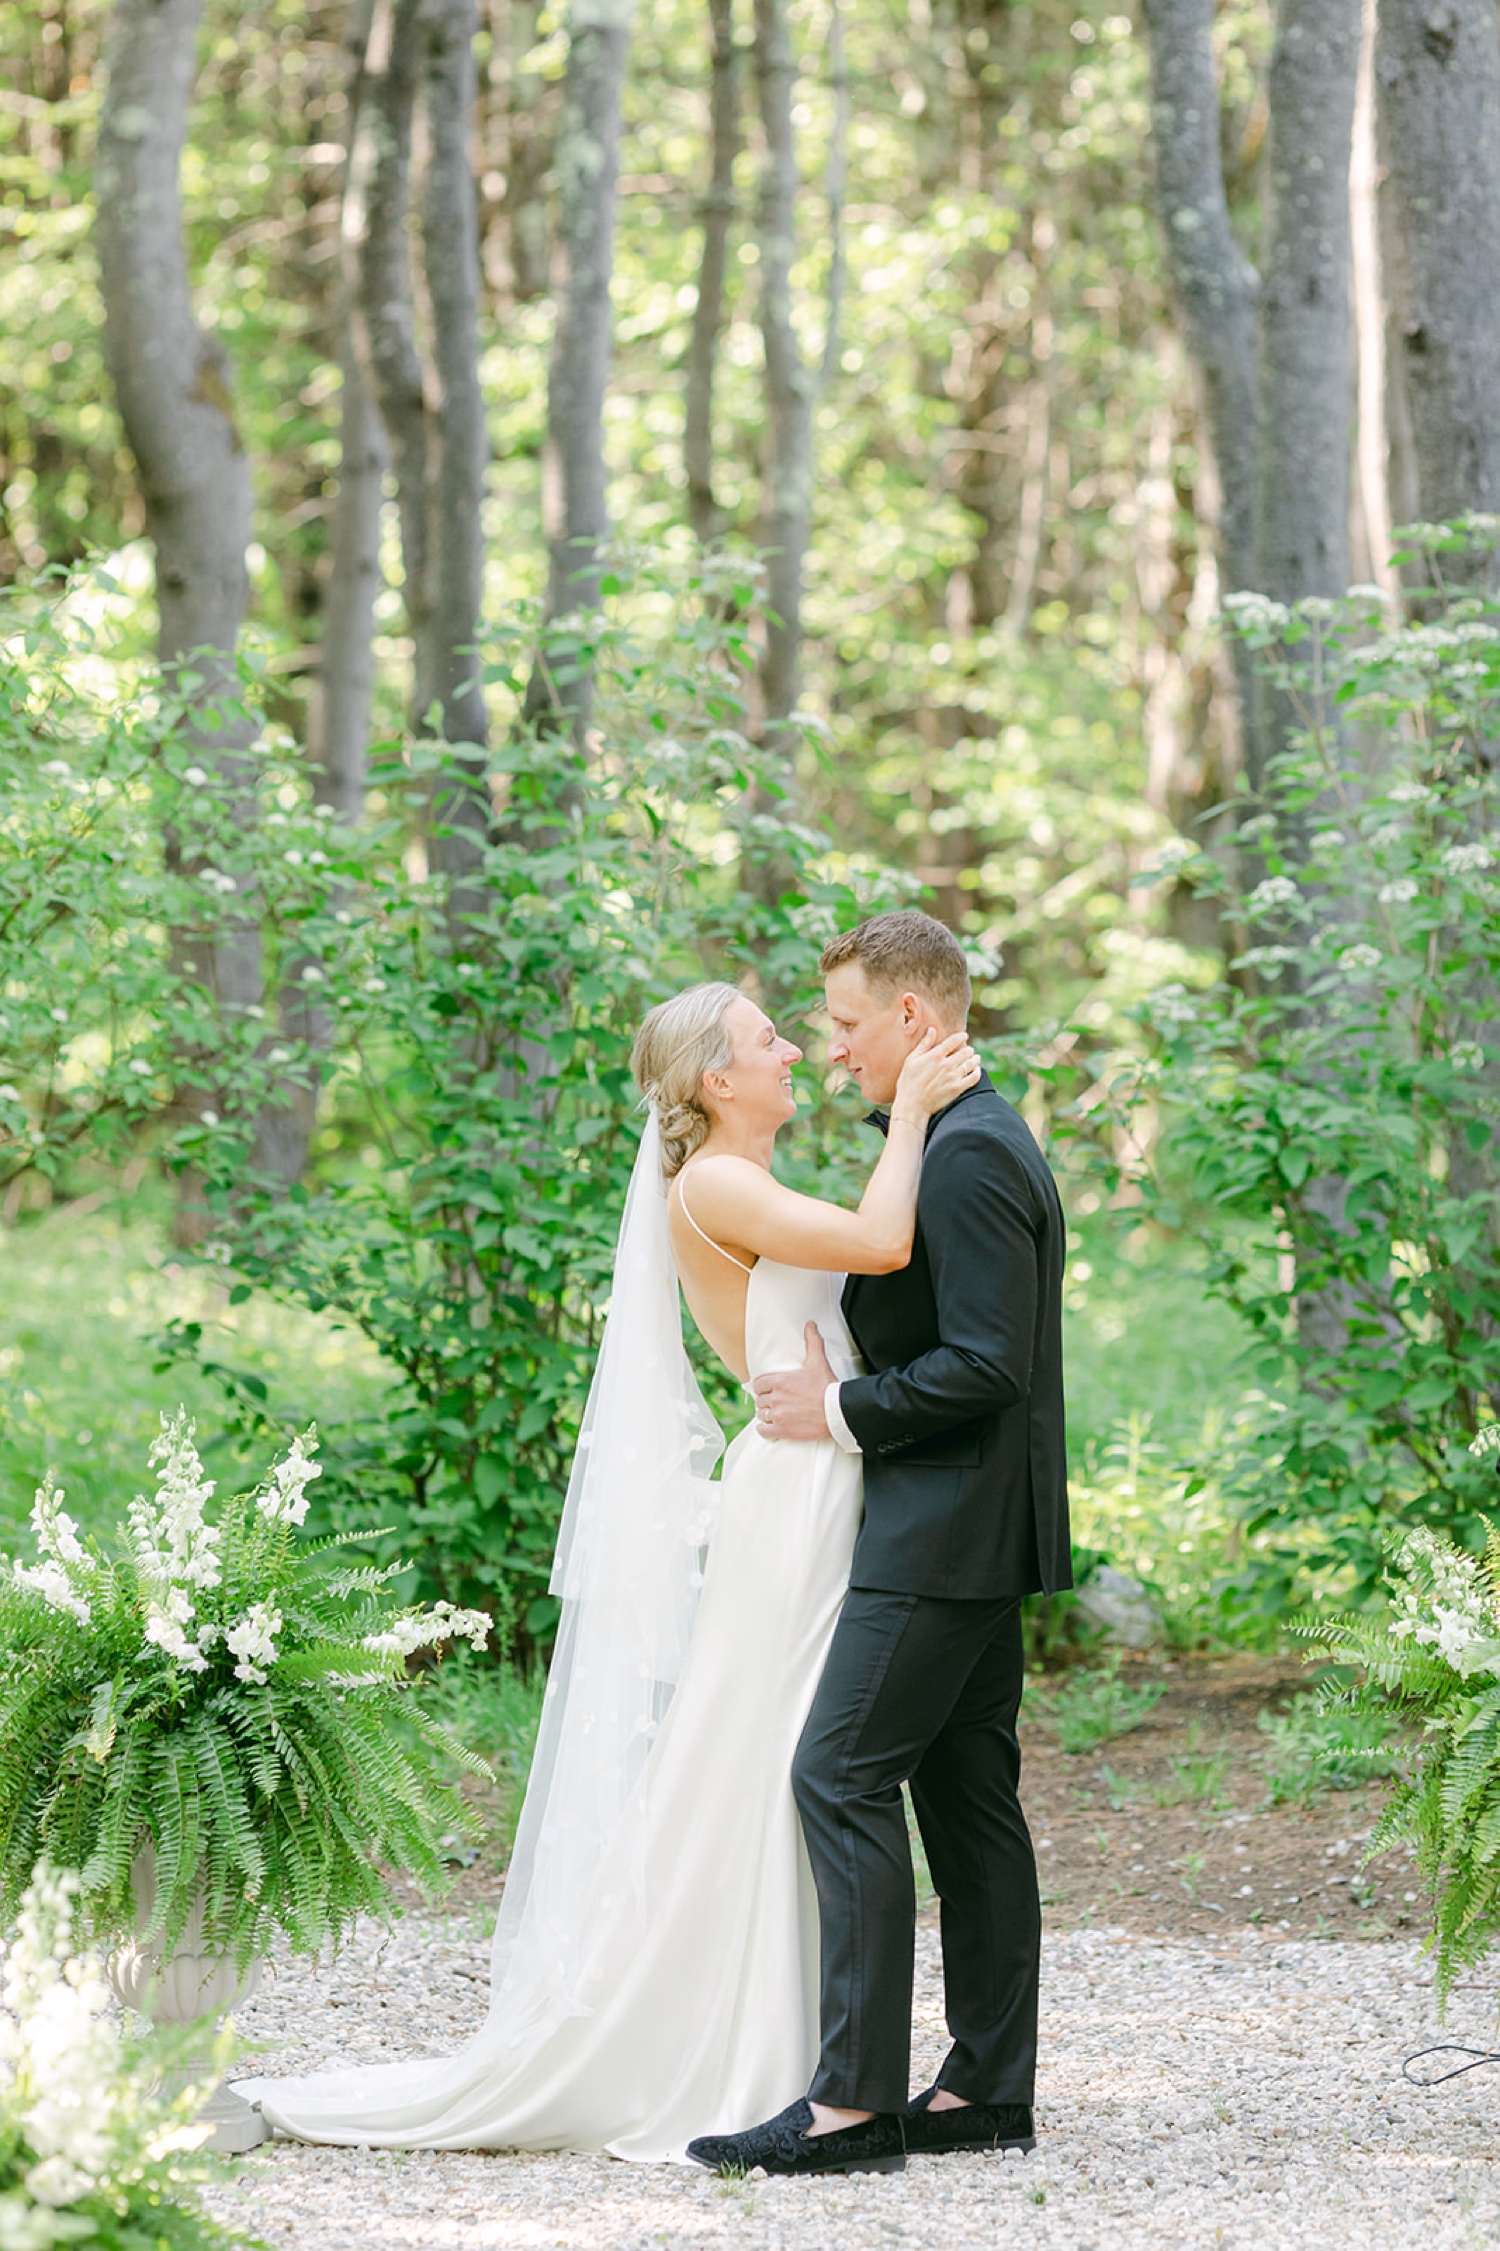 Nature-inspired wedding at Flanagan Farm in Maine.